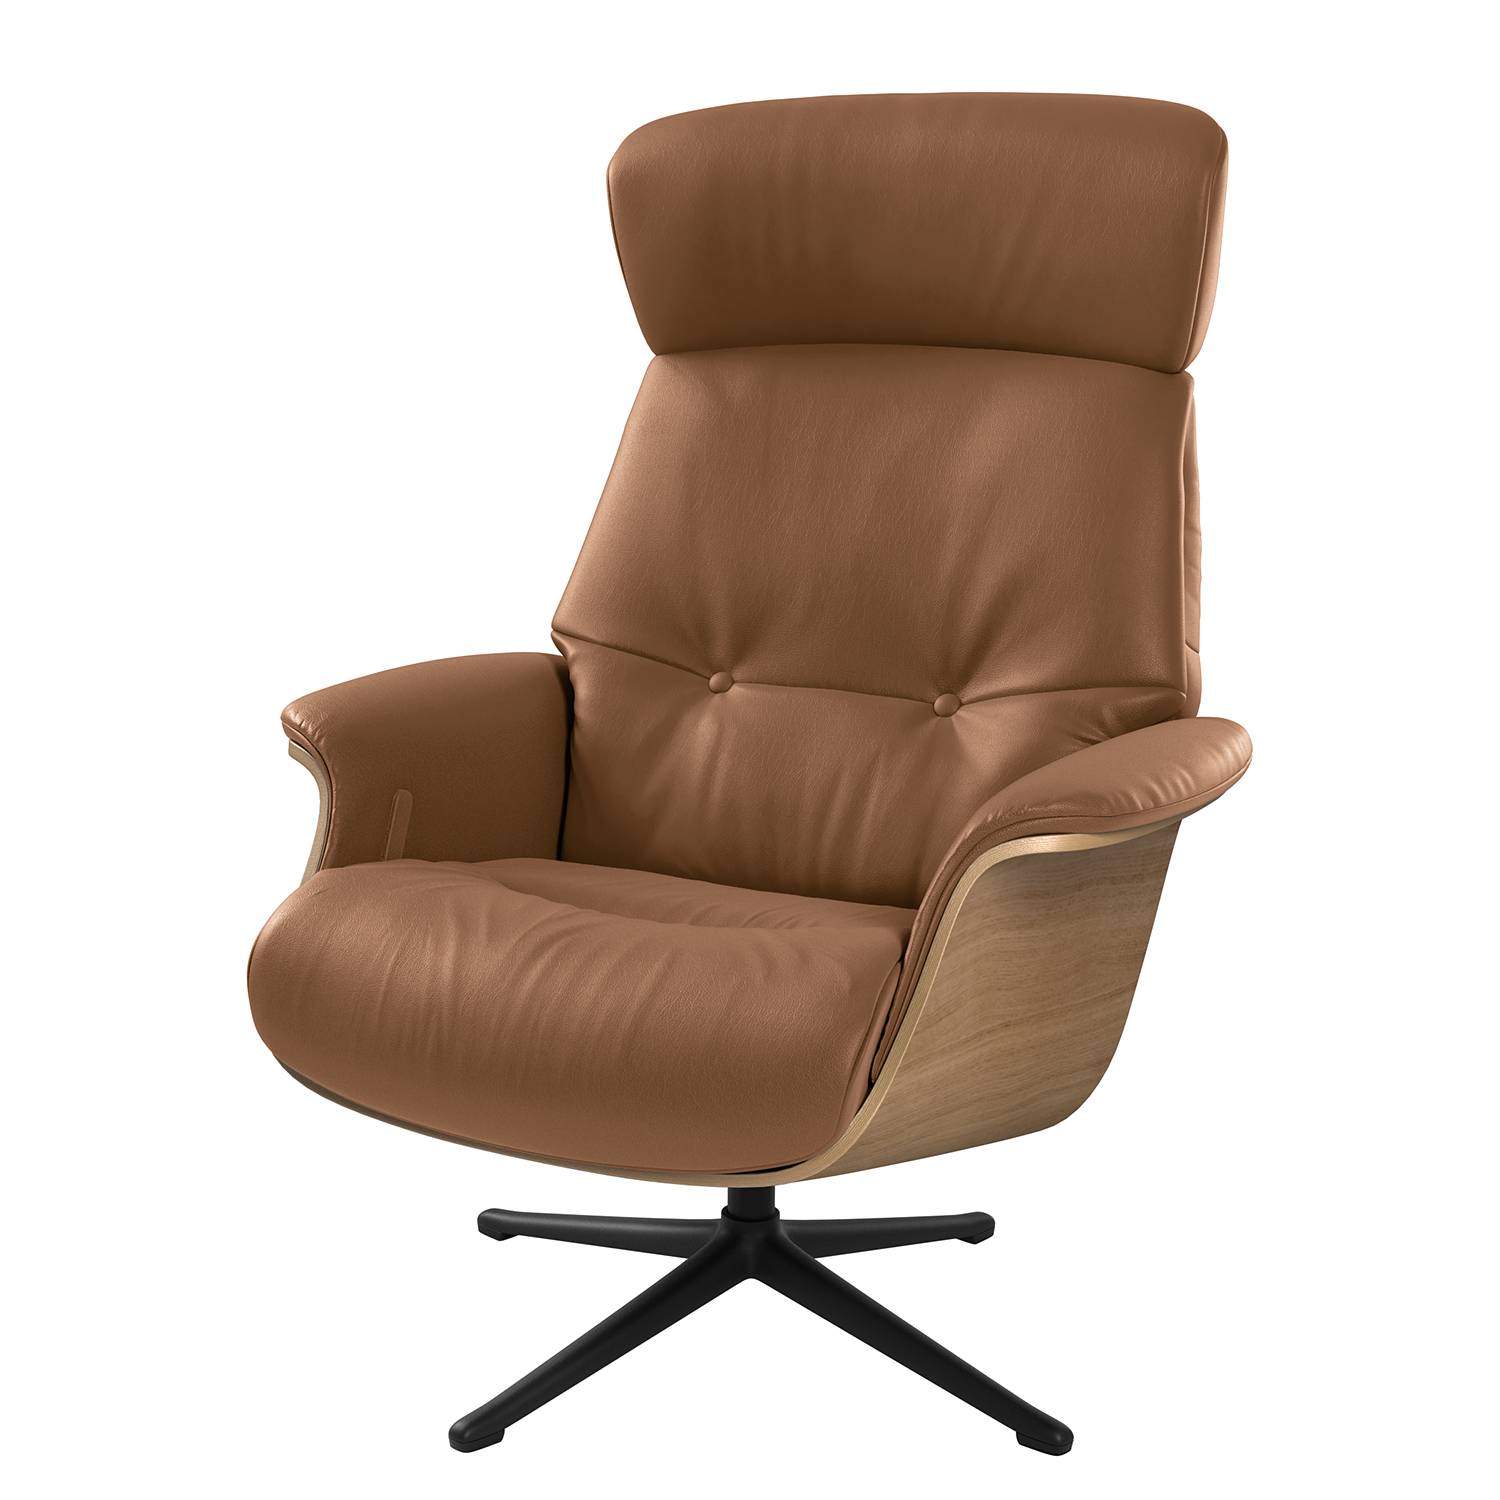 Image of Fauteuil relax Anderson I 000000001000131267